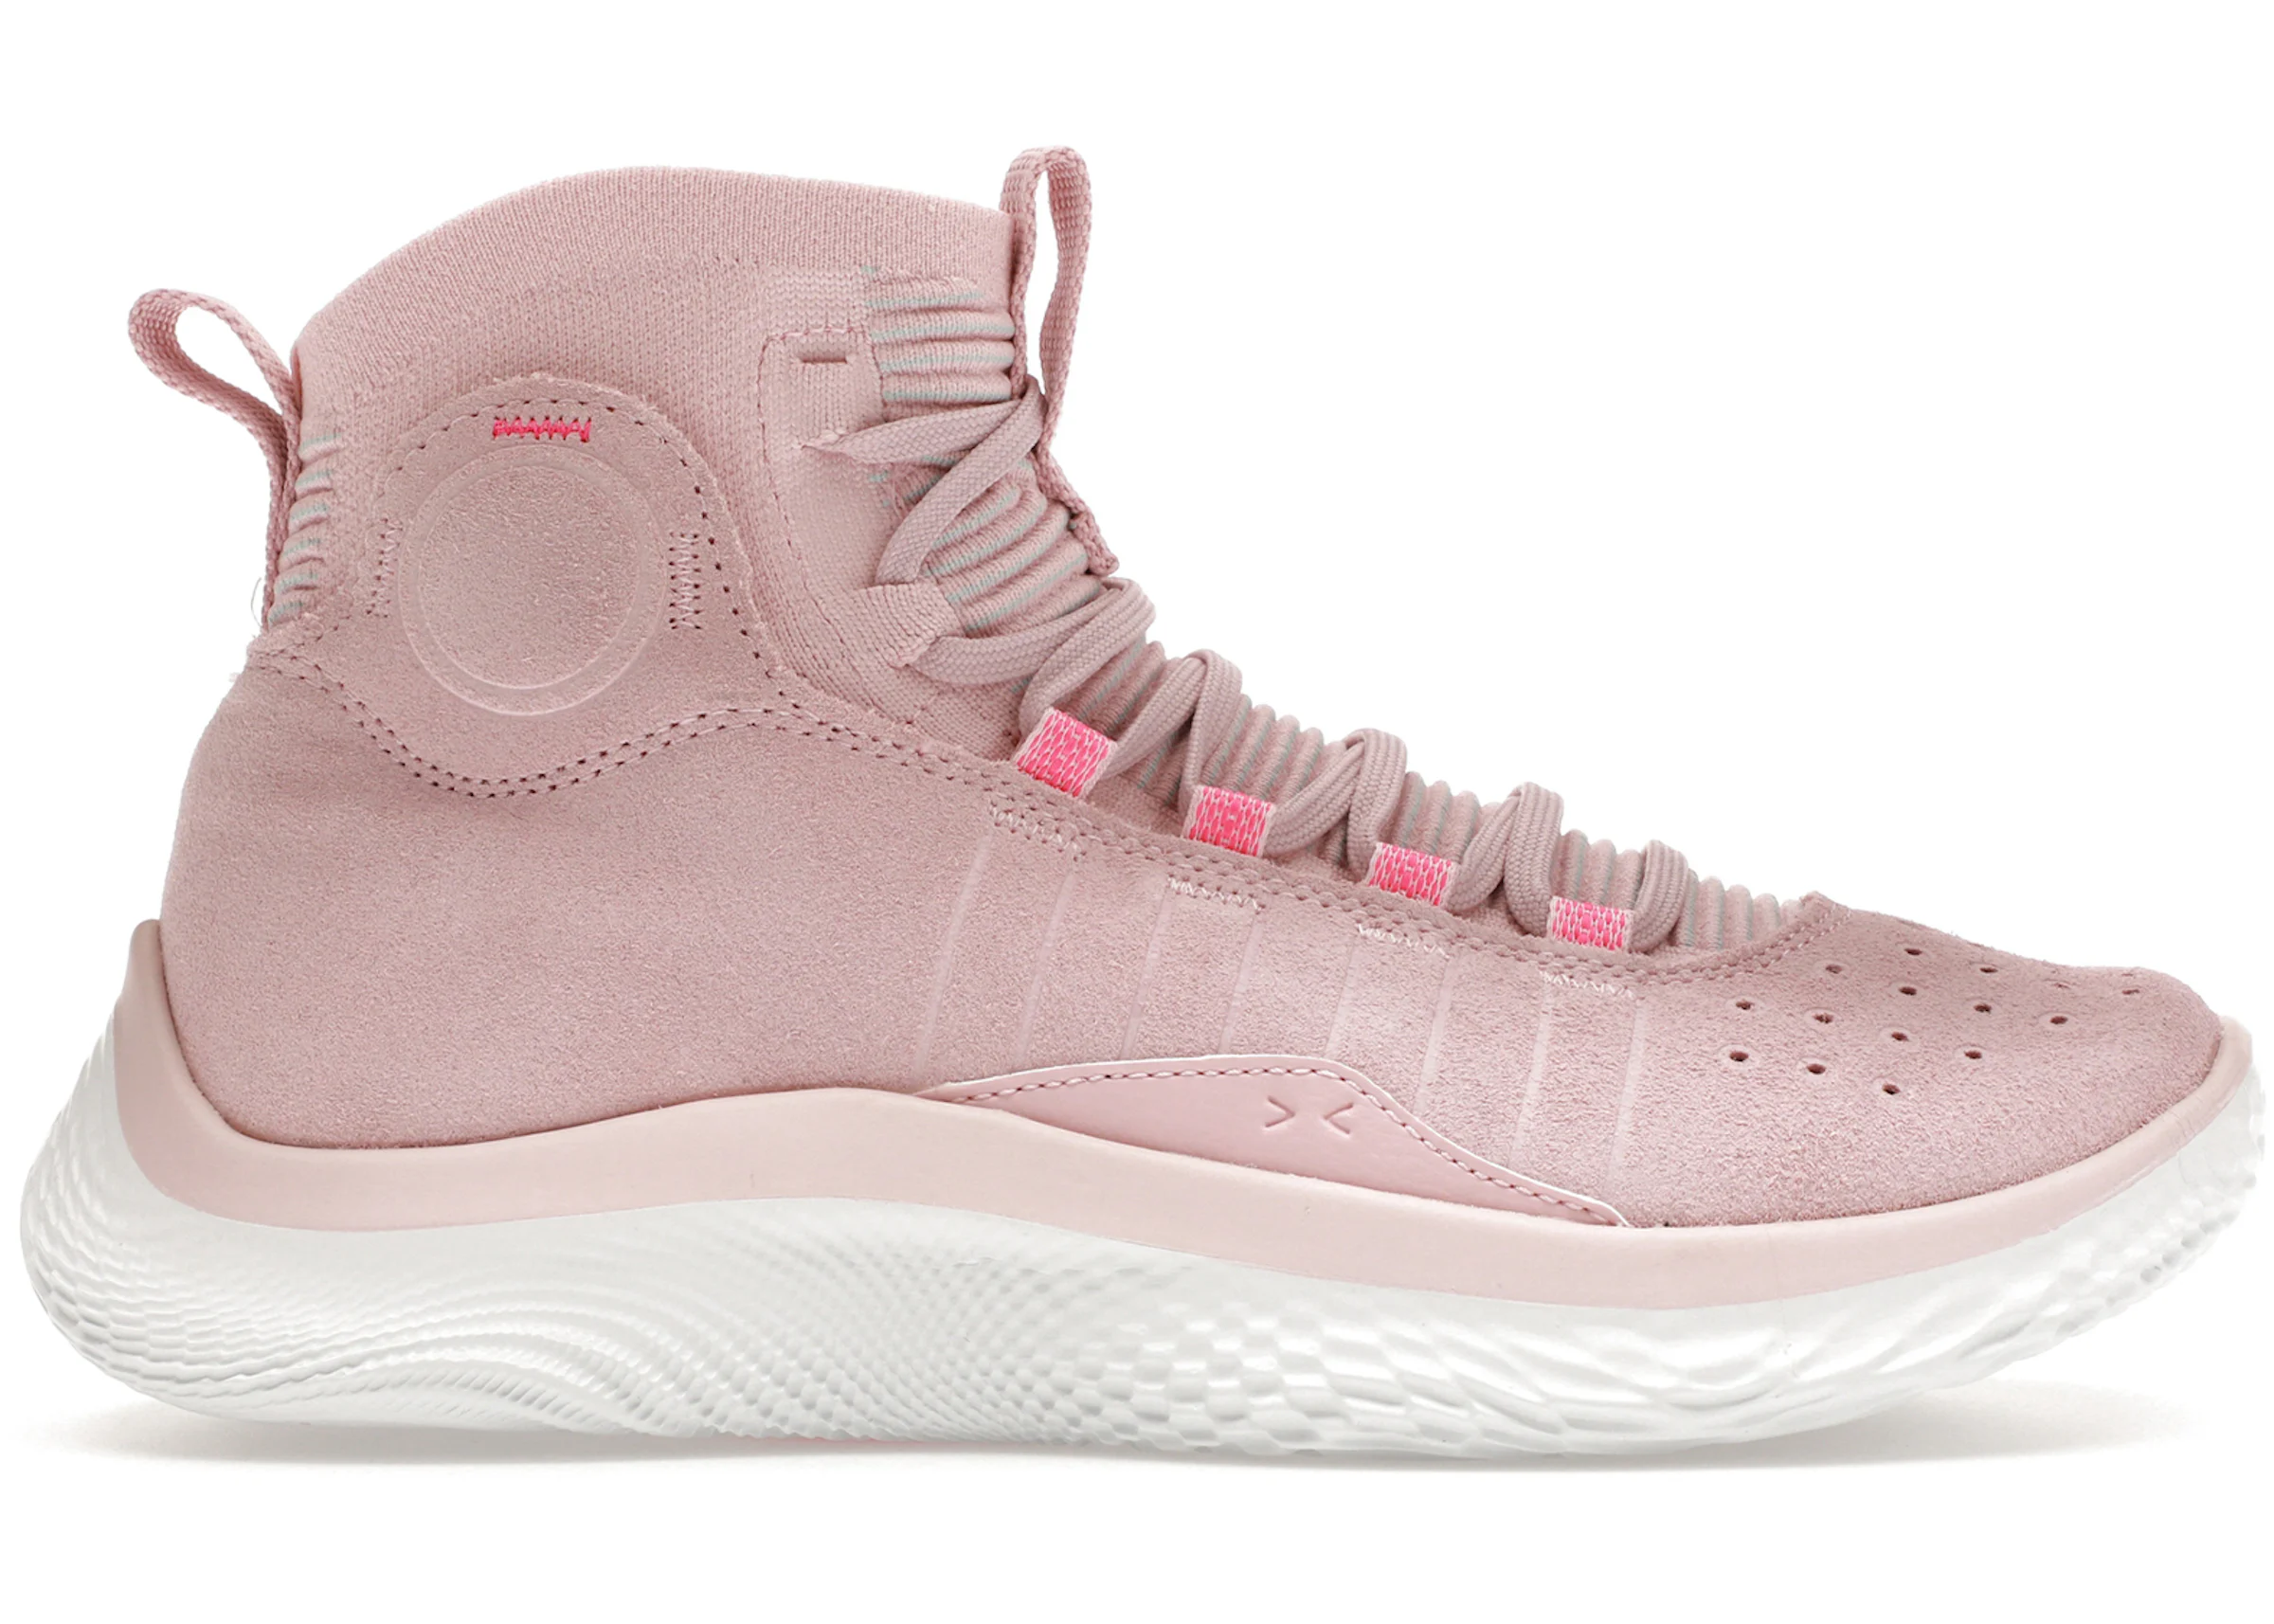 Under Armour Curry 4 Flotro Pink Men's - 3024861-600 - US